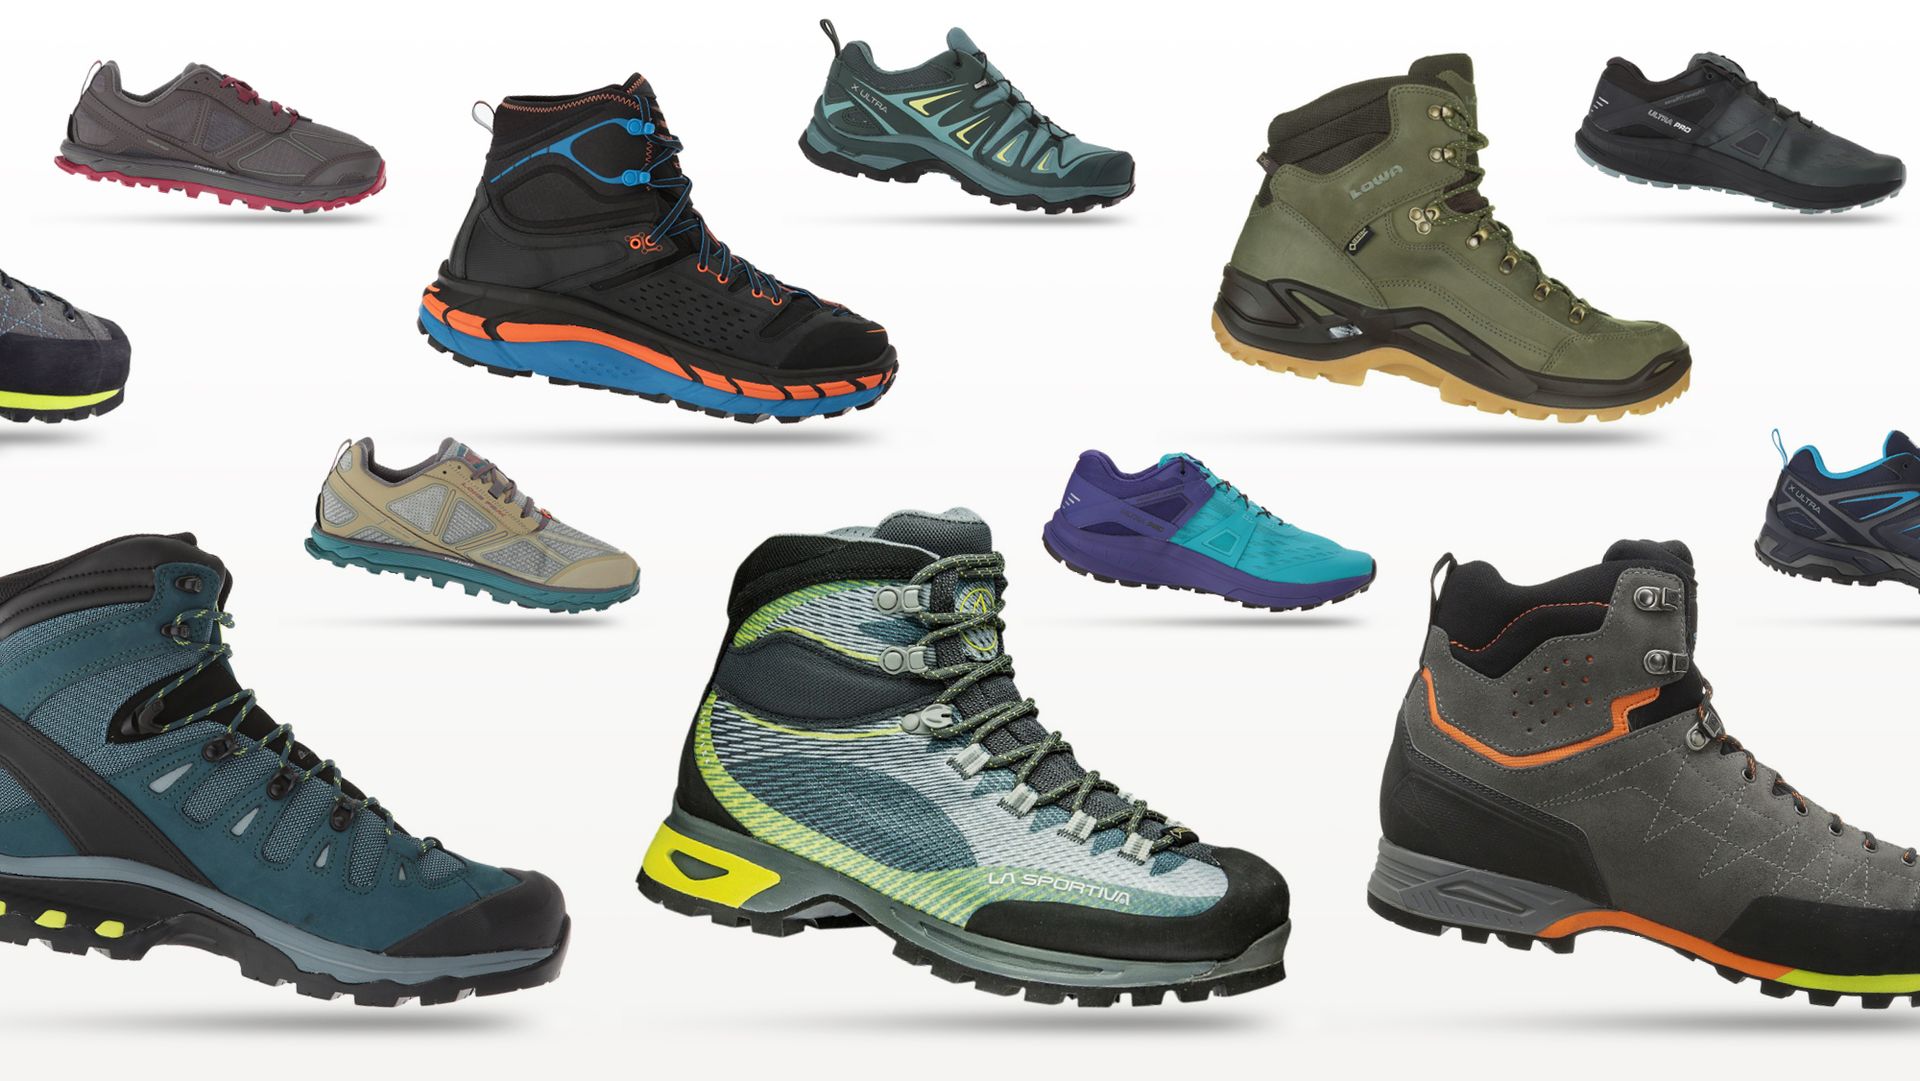 The Best Hiking Boots and Trail Running Shoes